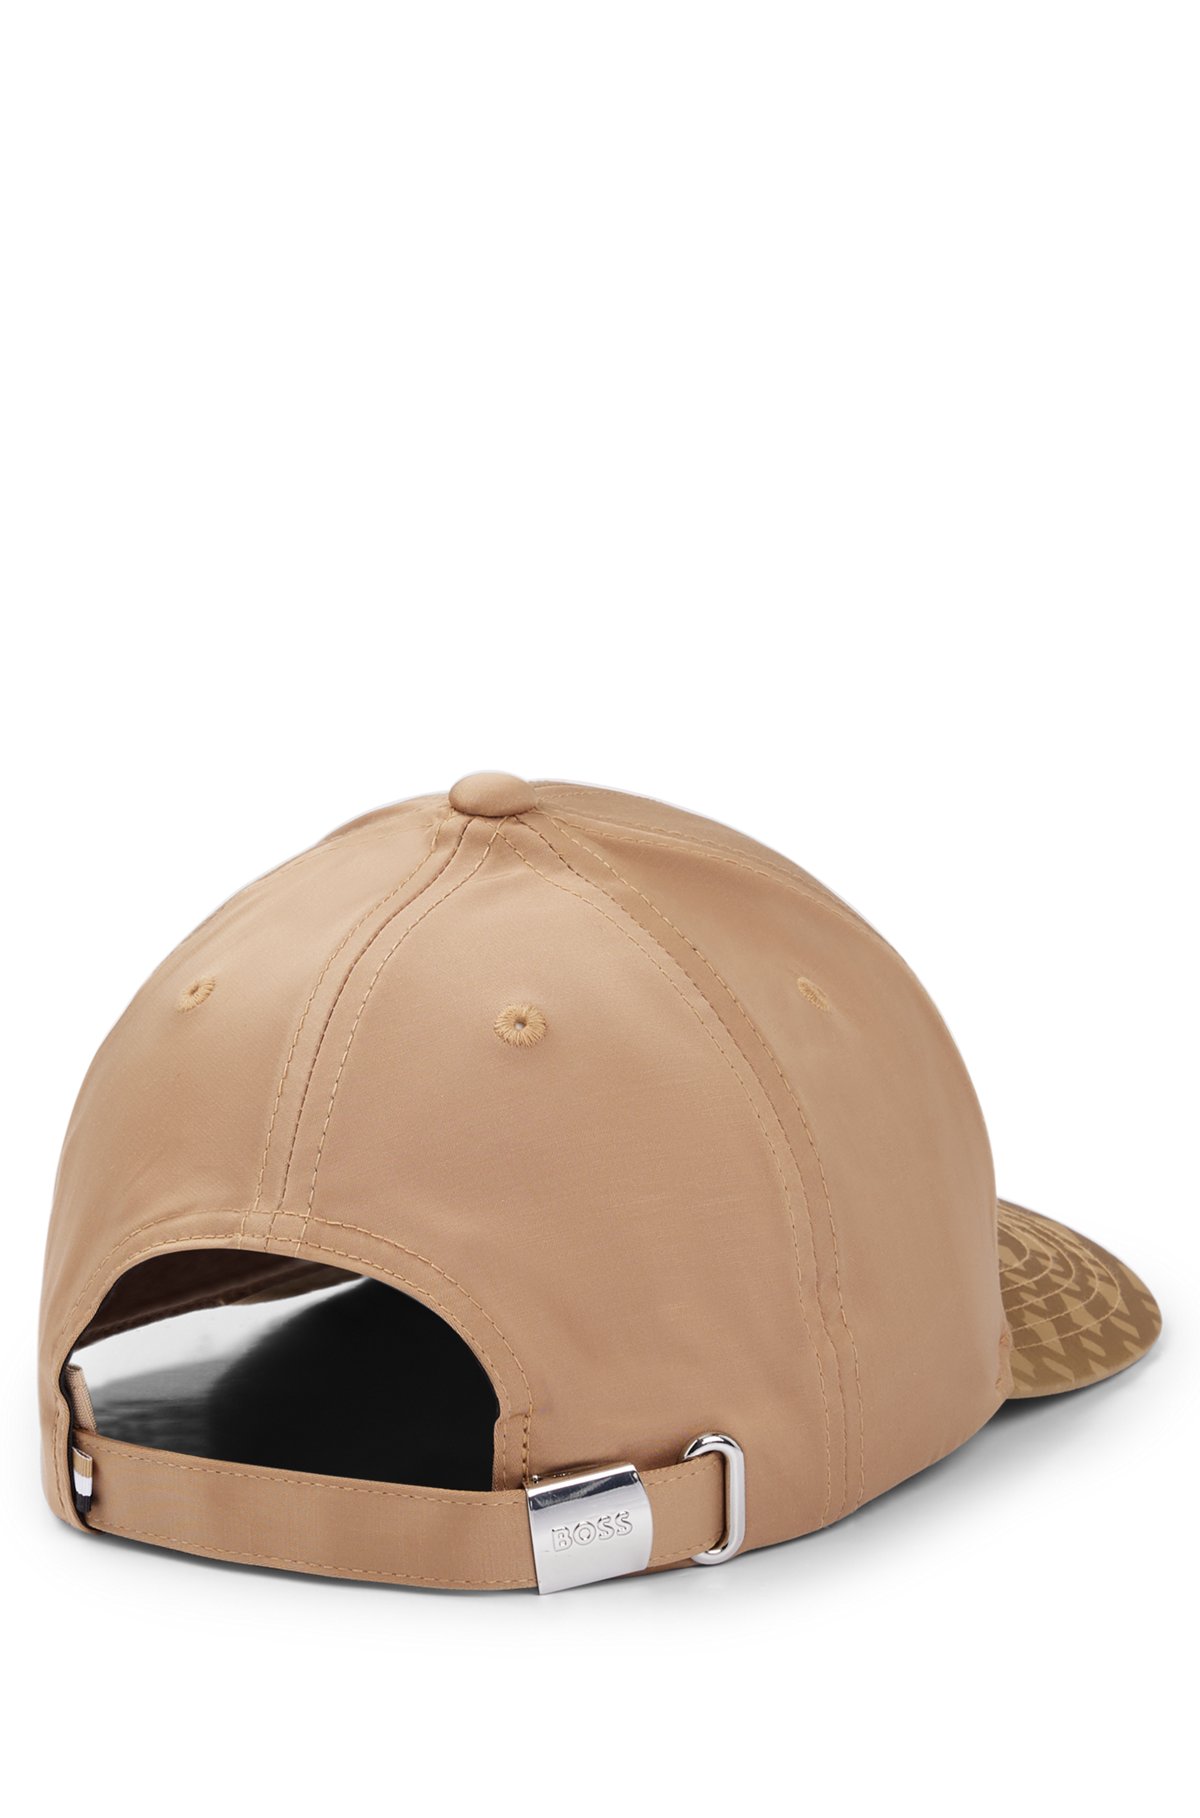 BOSS - Logo-embroidered cap in satin with monogram jacquard